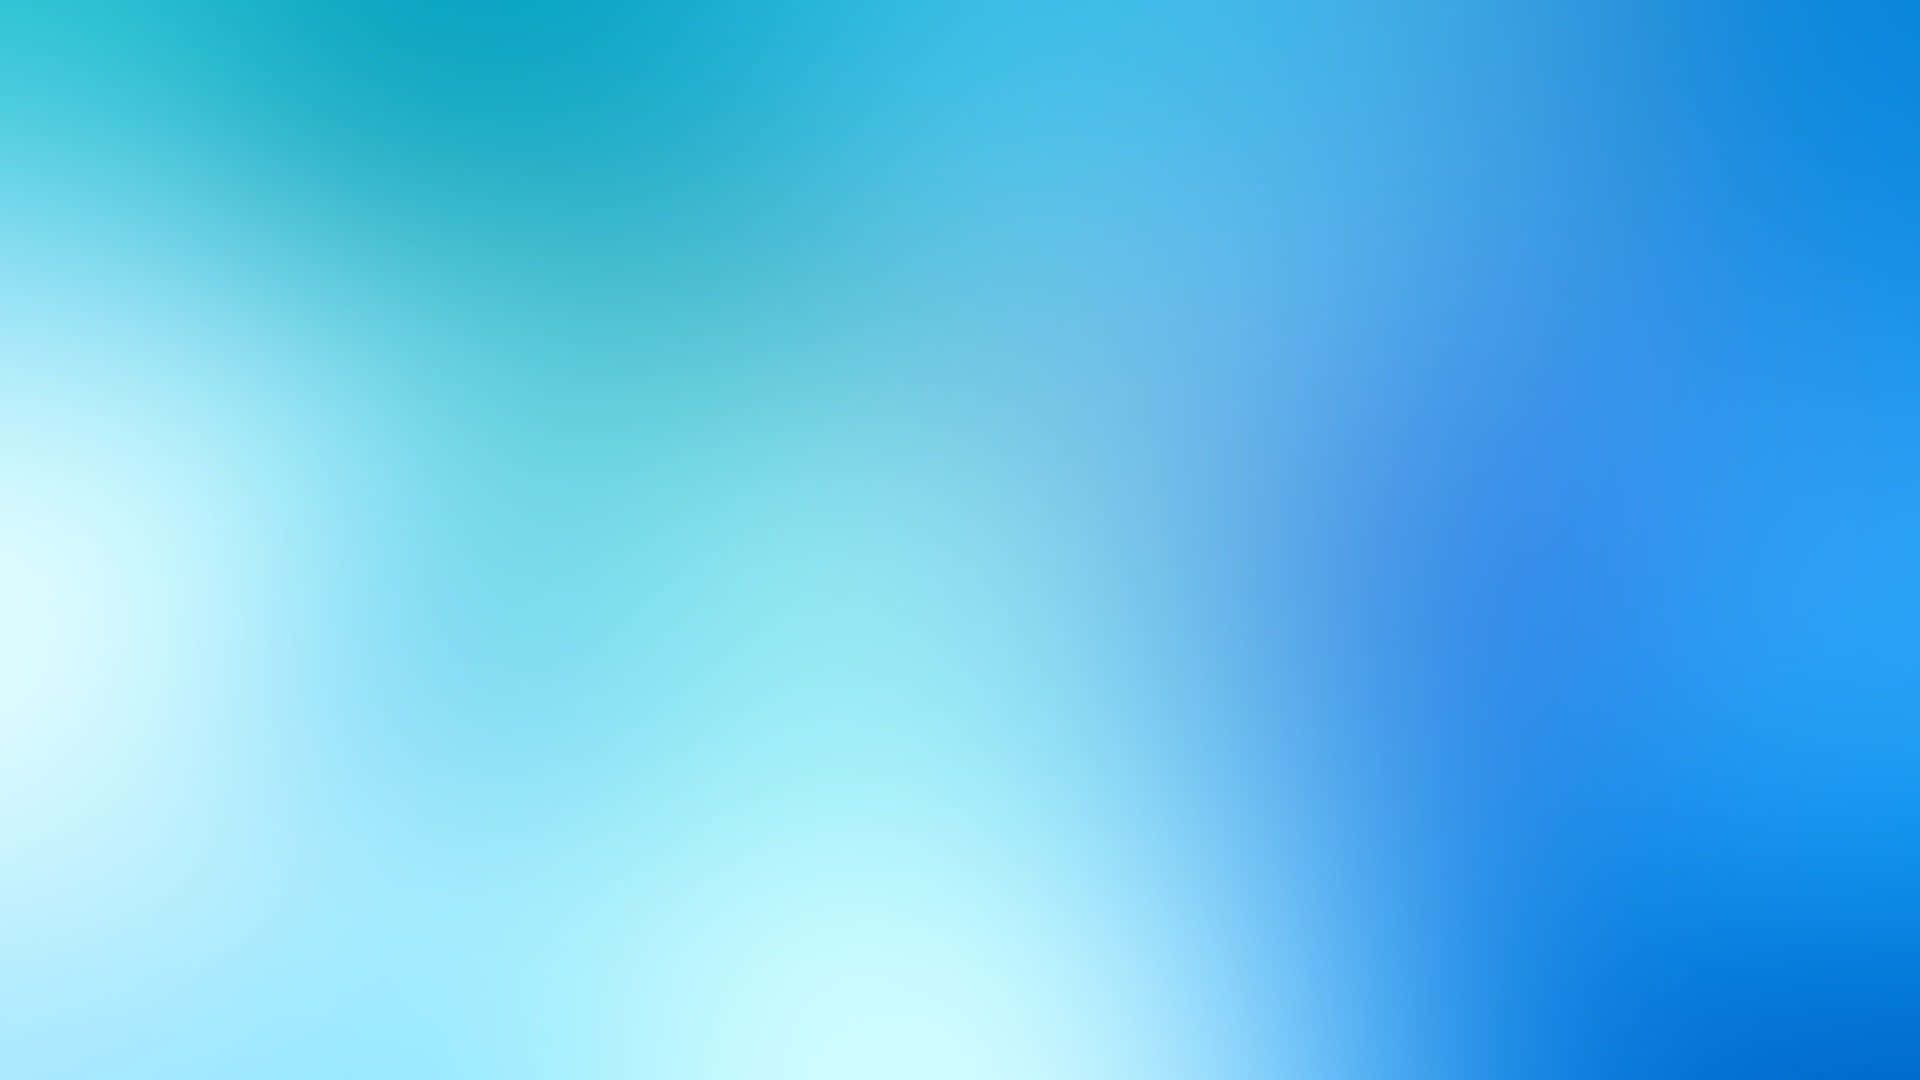 Blue And White Blurred Background Wallpaper